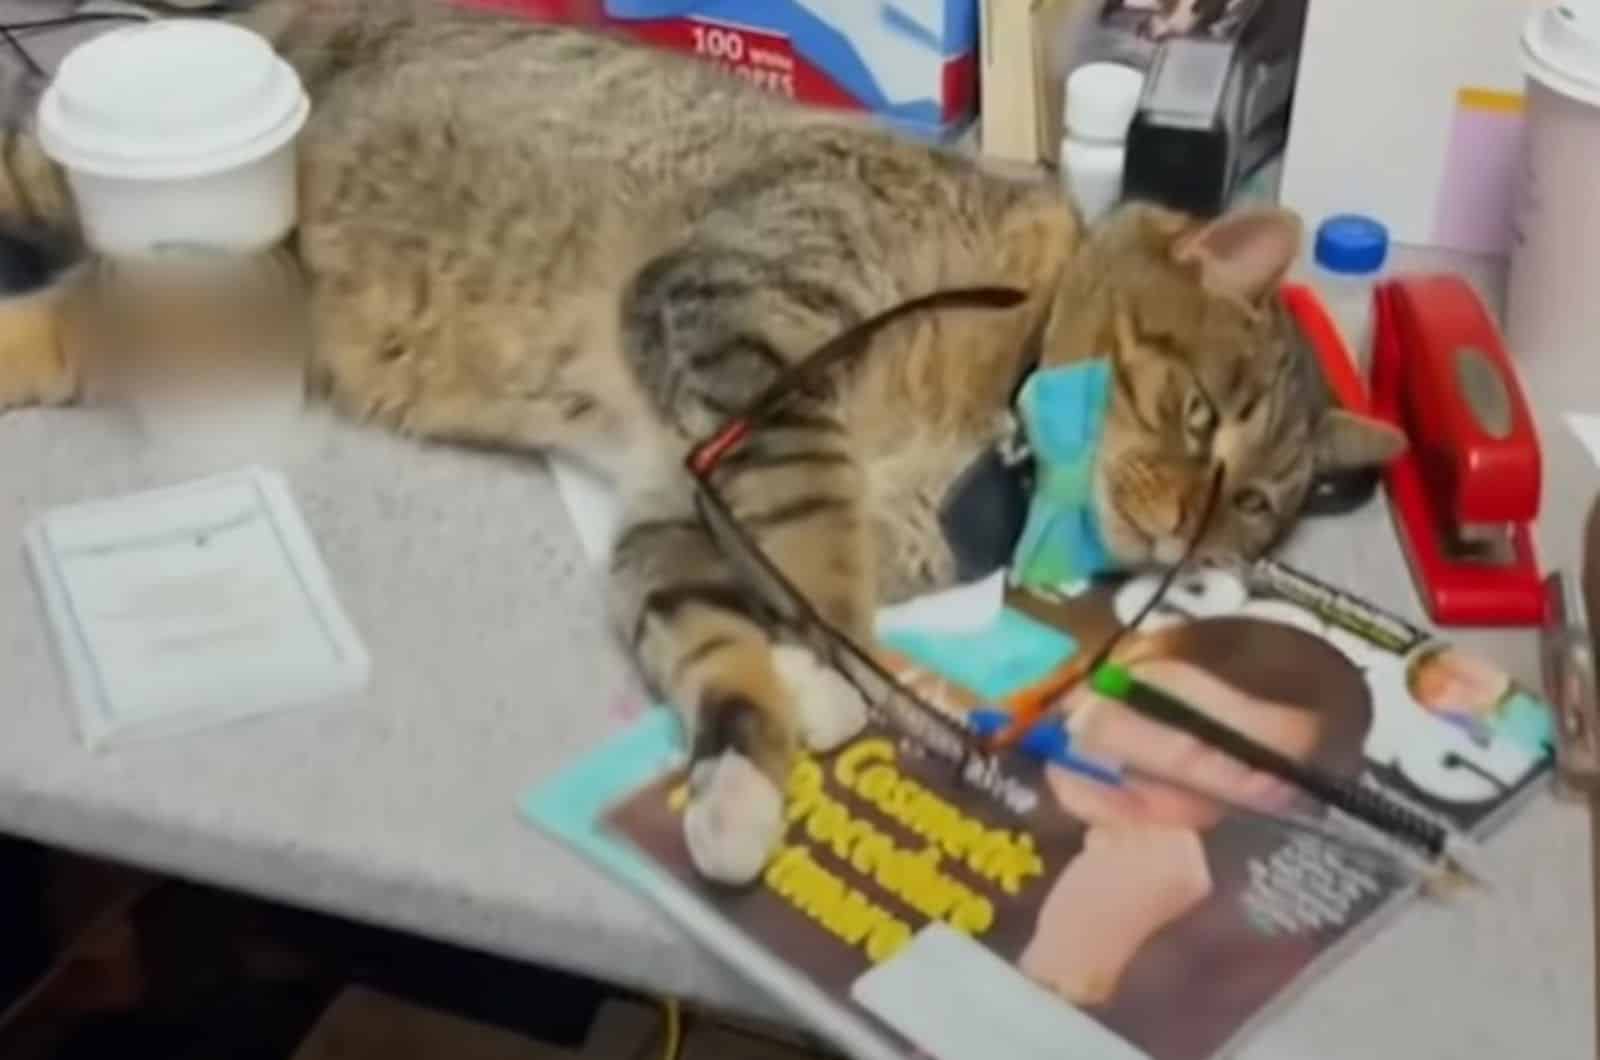 the cat is lying on the table